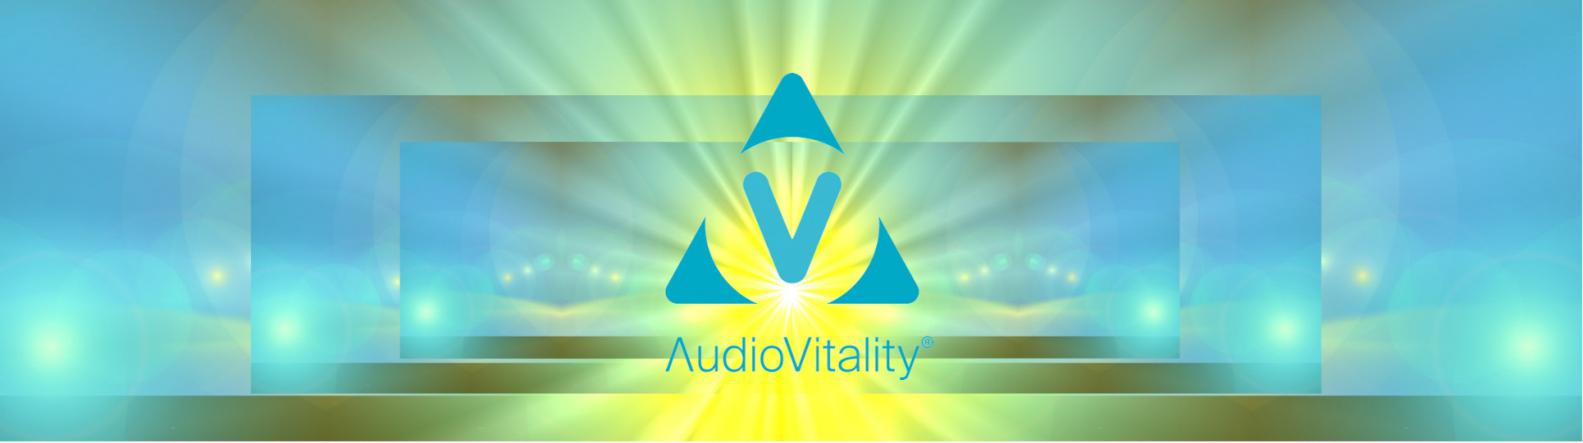 audiovitality basse frequence